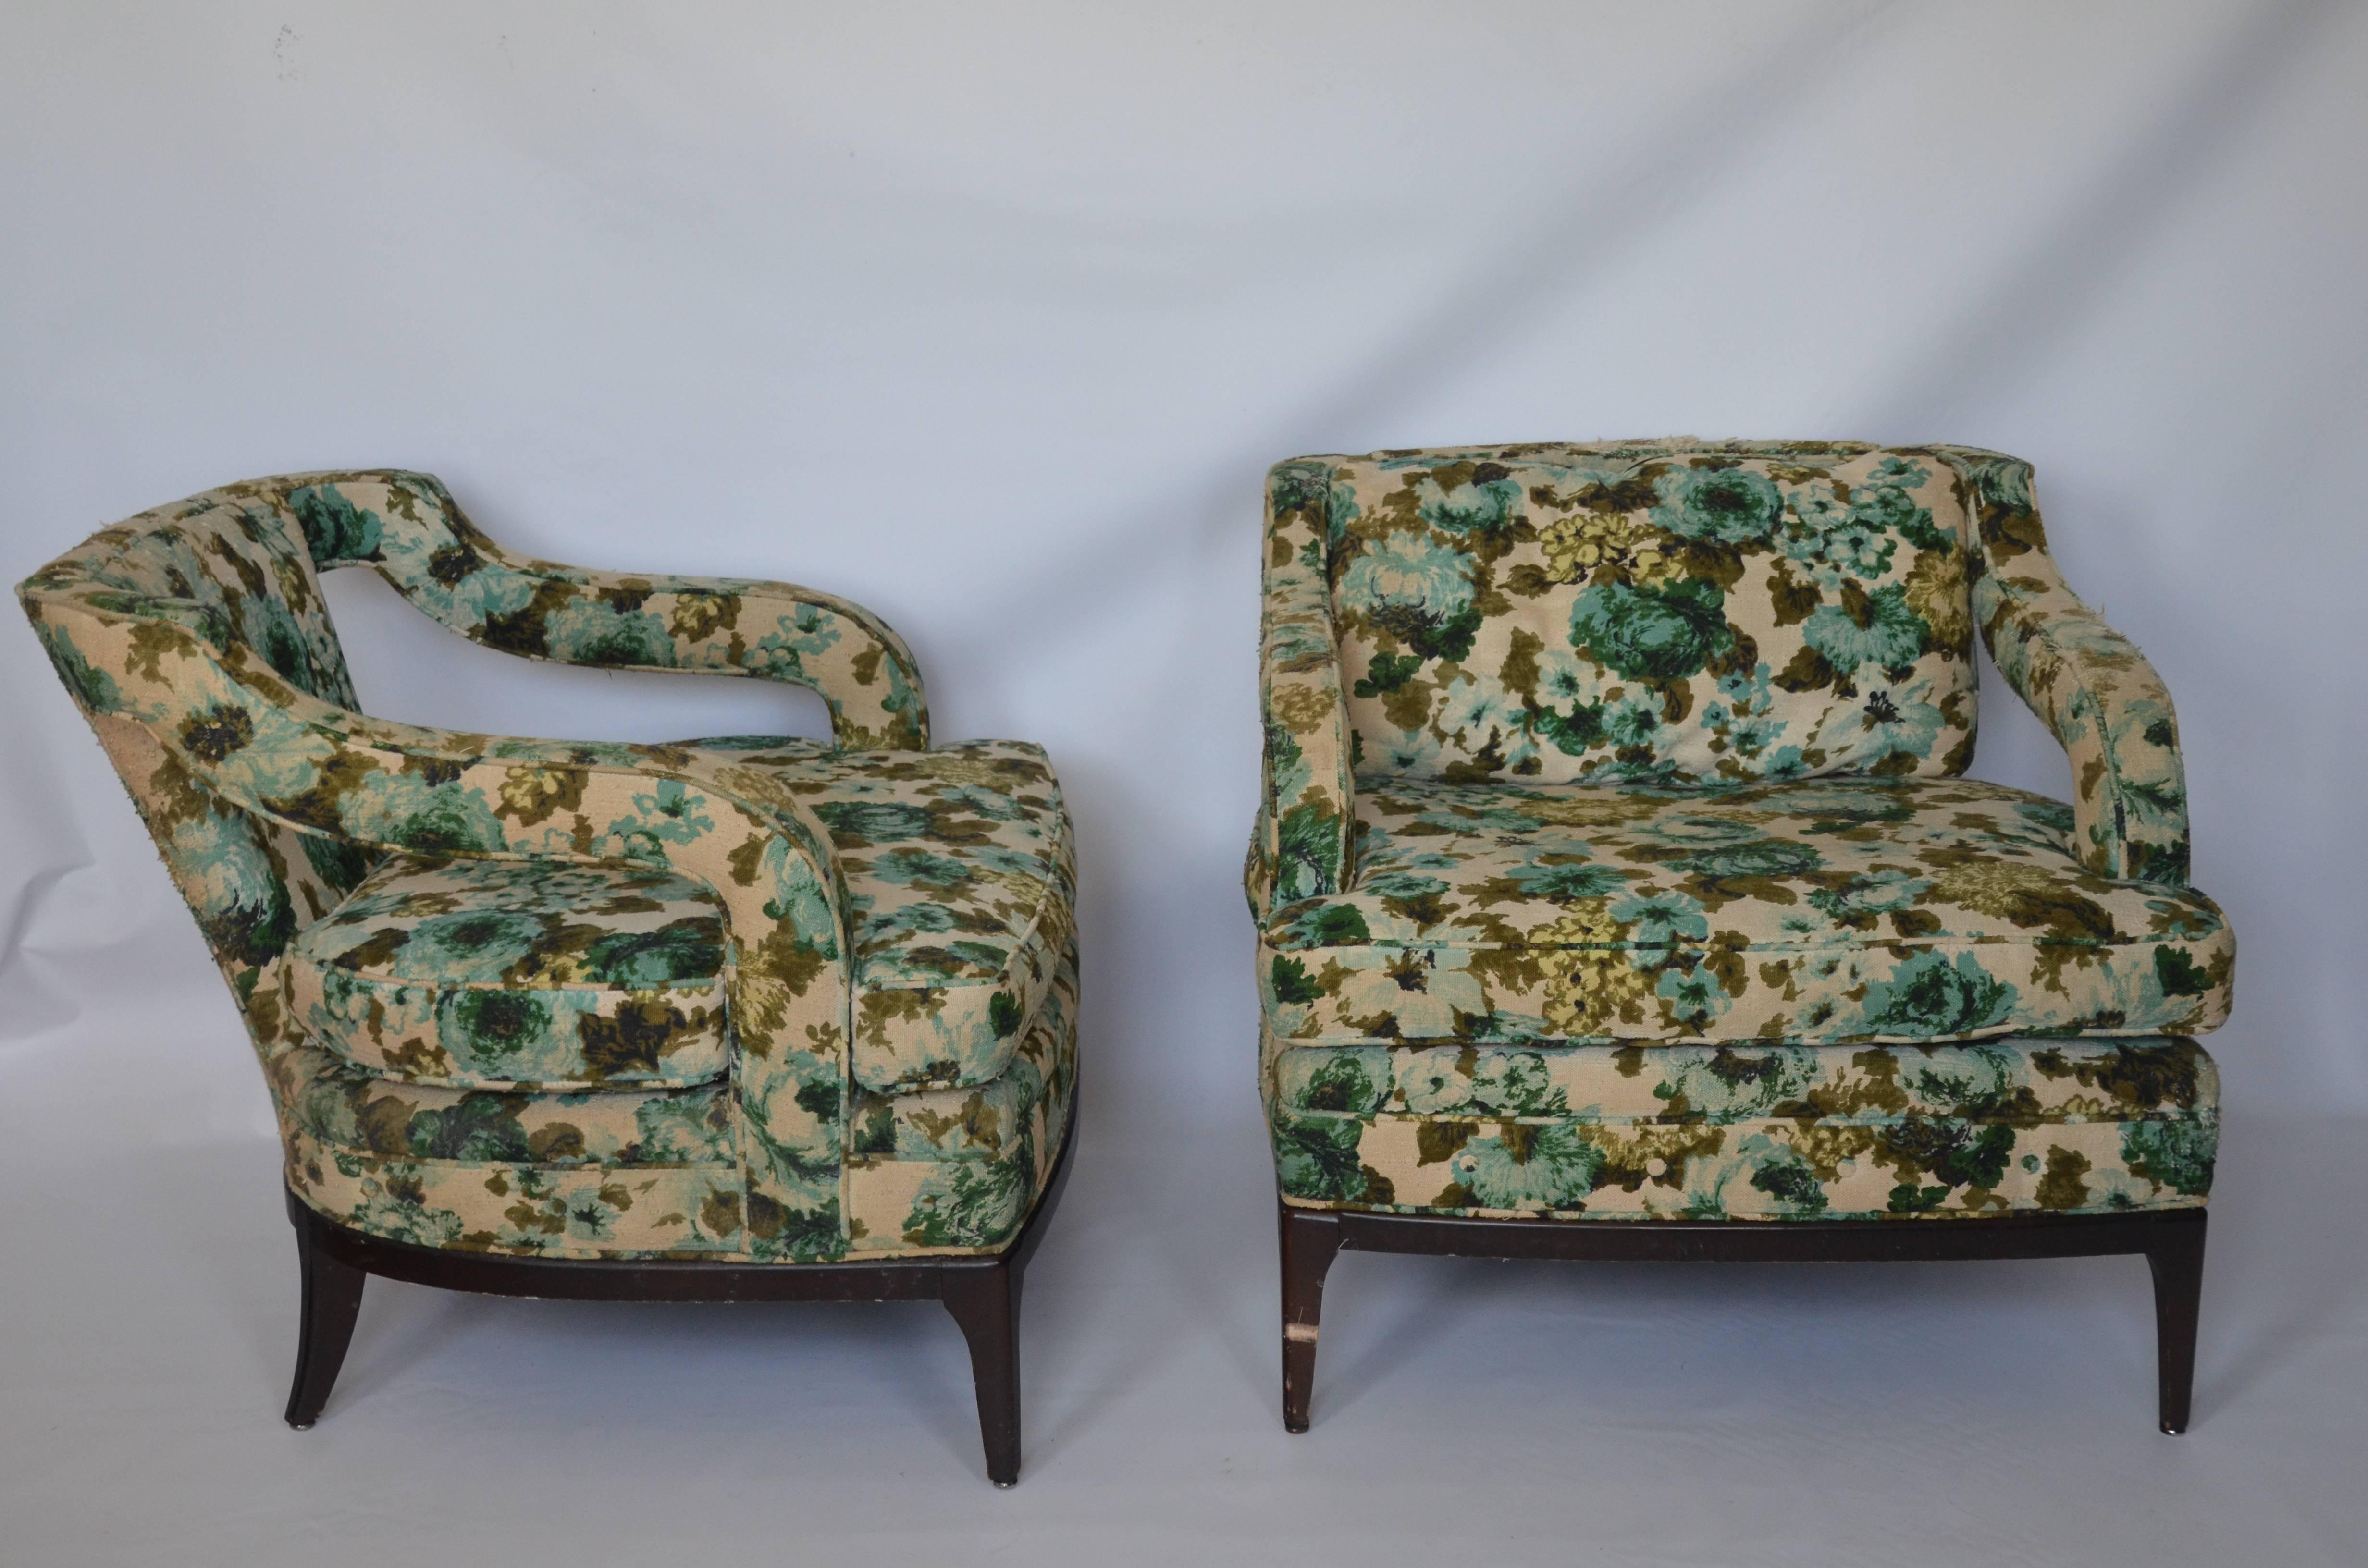 Pair of armchairs by Shaw of Charlotte, NC with interesting lines featuring fully upholstered stylized armrests. The chairs have a bottom and back cushion and are extremely comfortable. These need reupholstered but the bones are very good. The